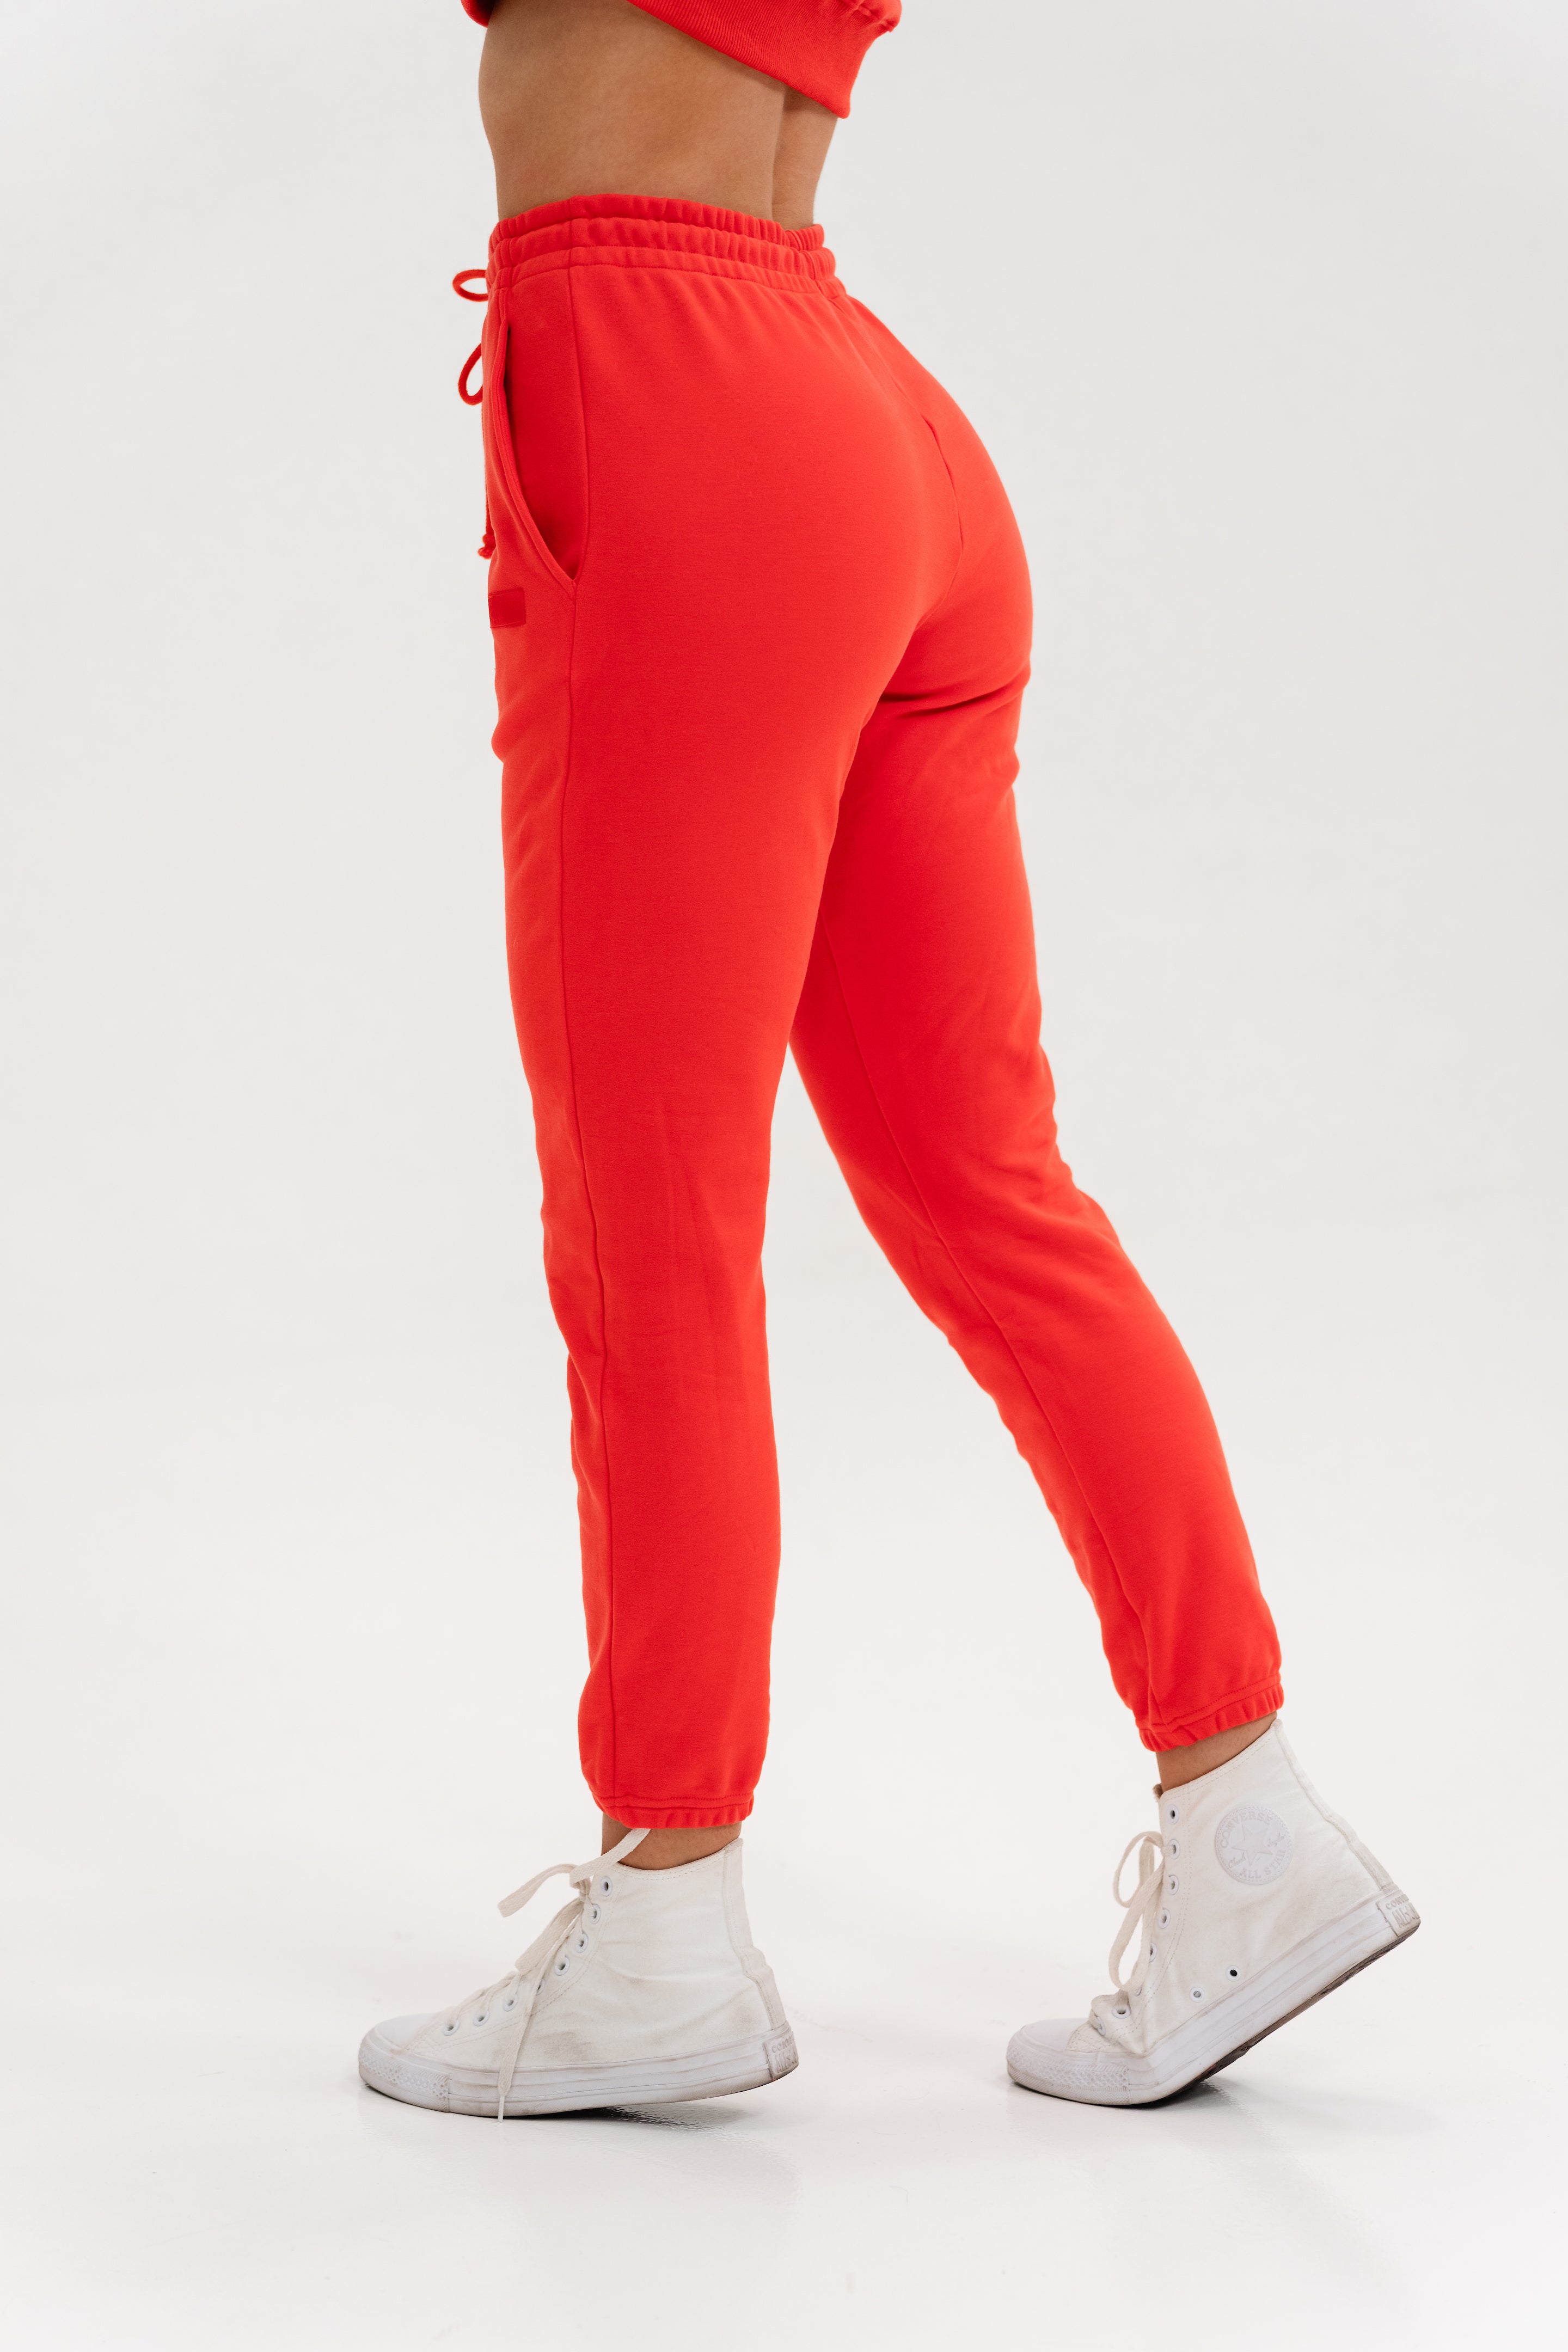 NVGTN Ruby Red Jogger Sweatpants  Red joggers, Jogger sweatpants,  Sweatpants